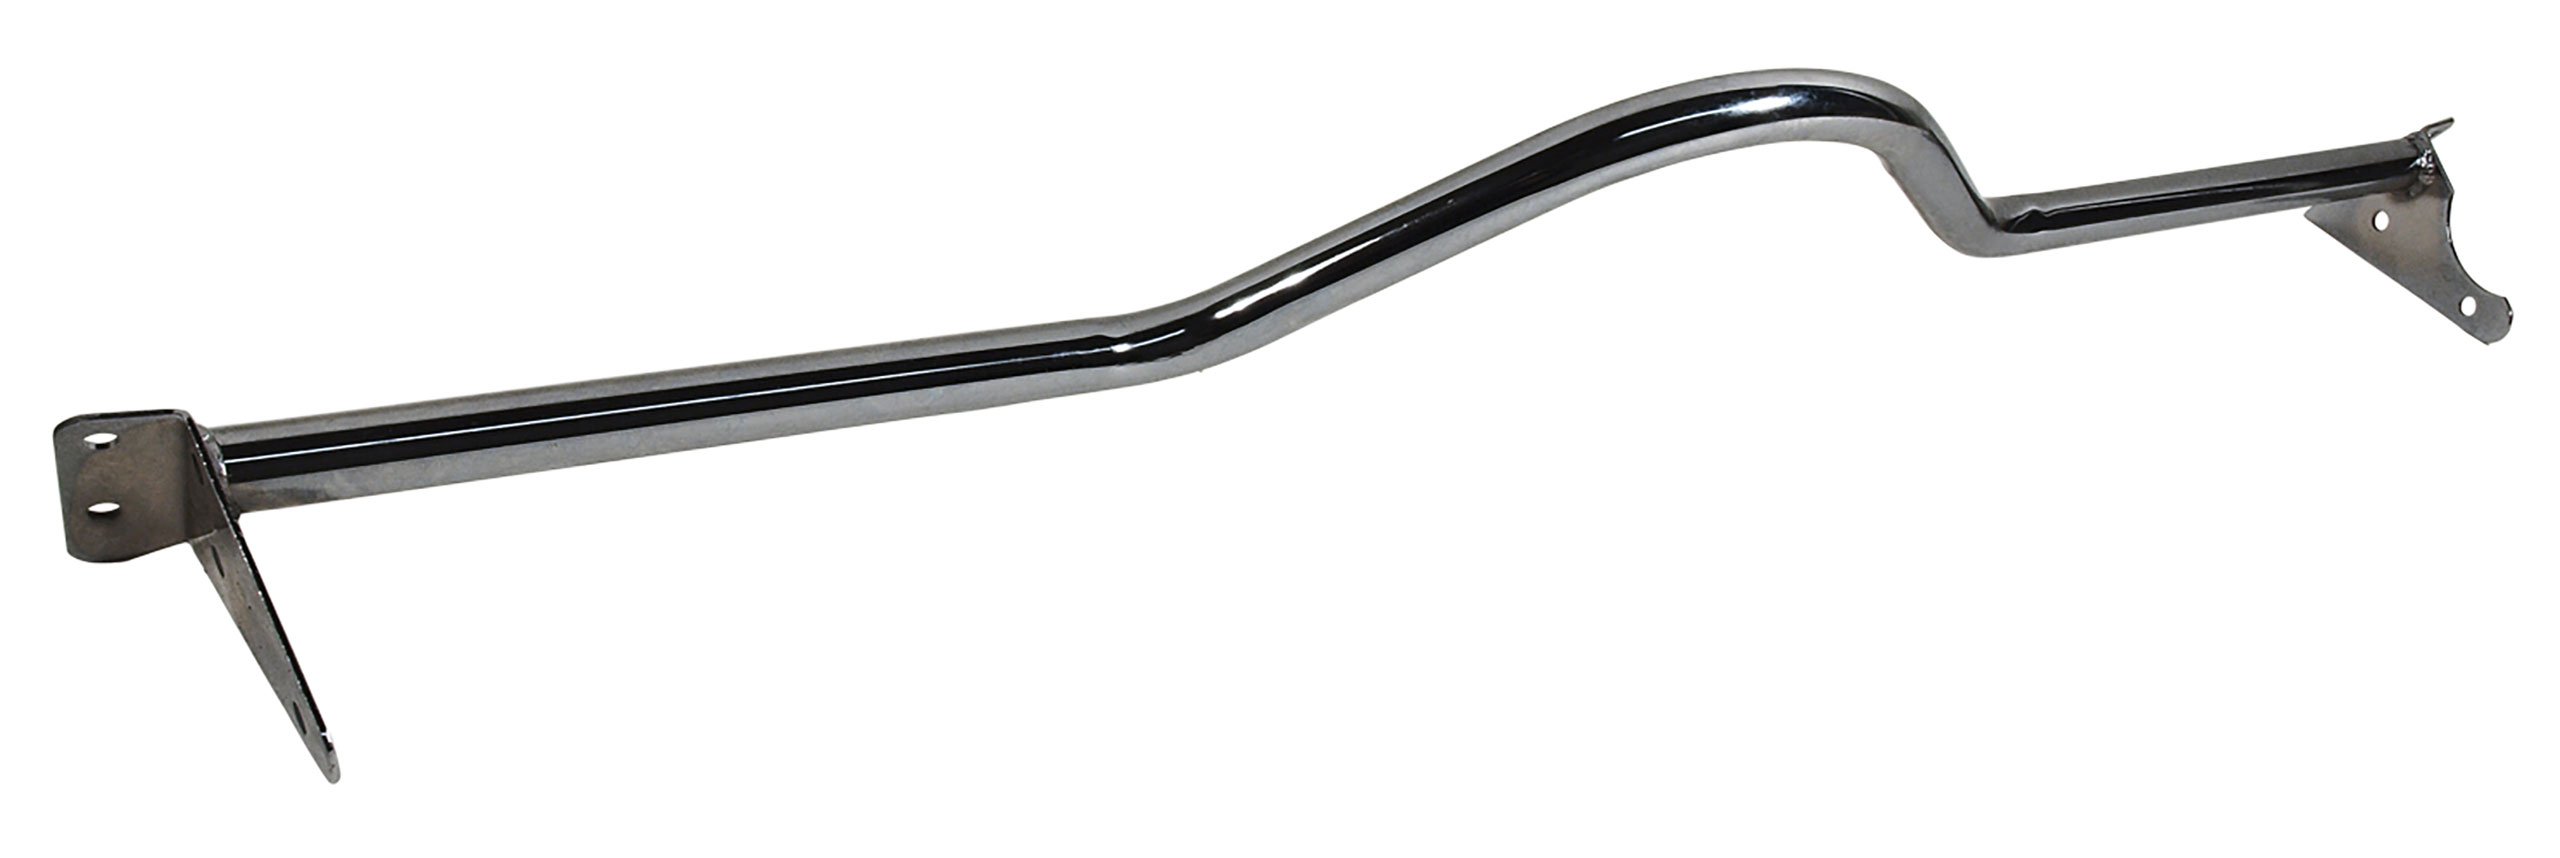 First Generation 1967-1968 Ford Mustang Monte Carlo Bar - Curved - Chrome - CA